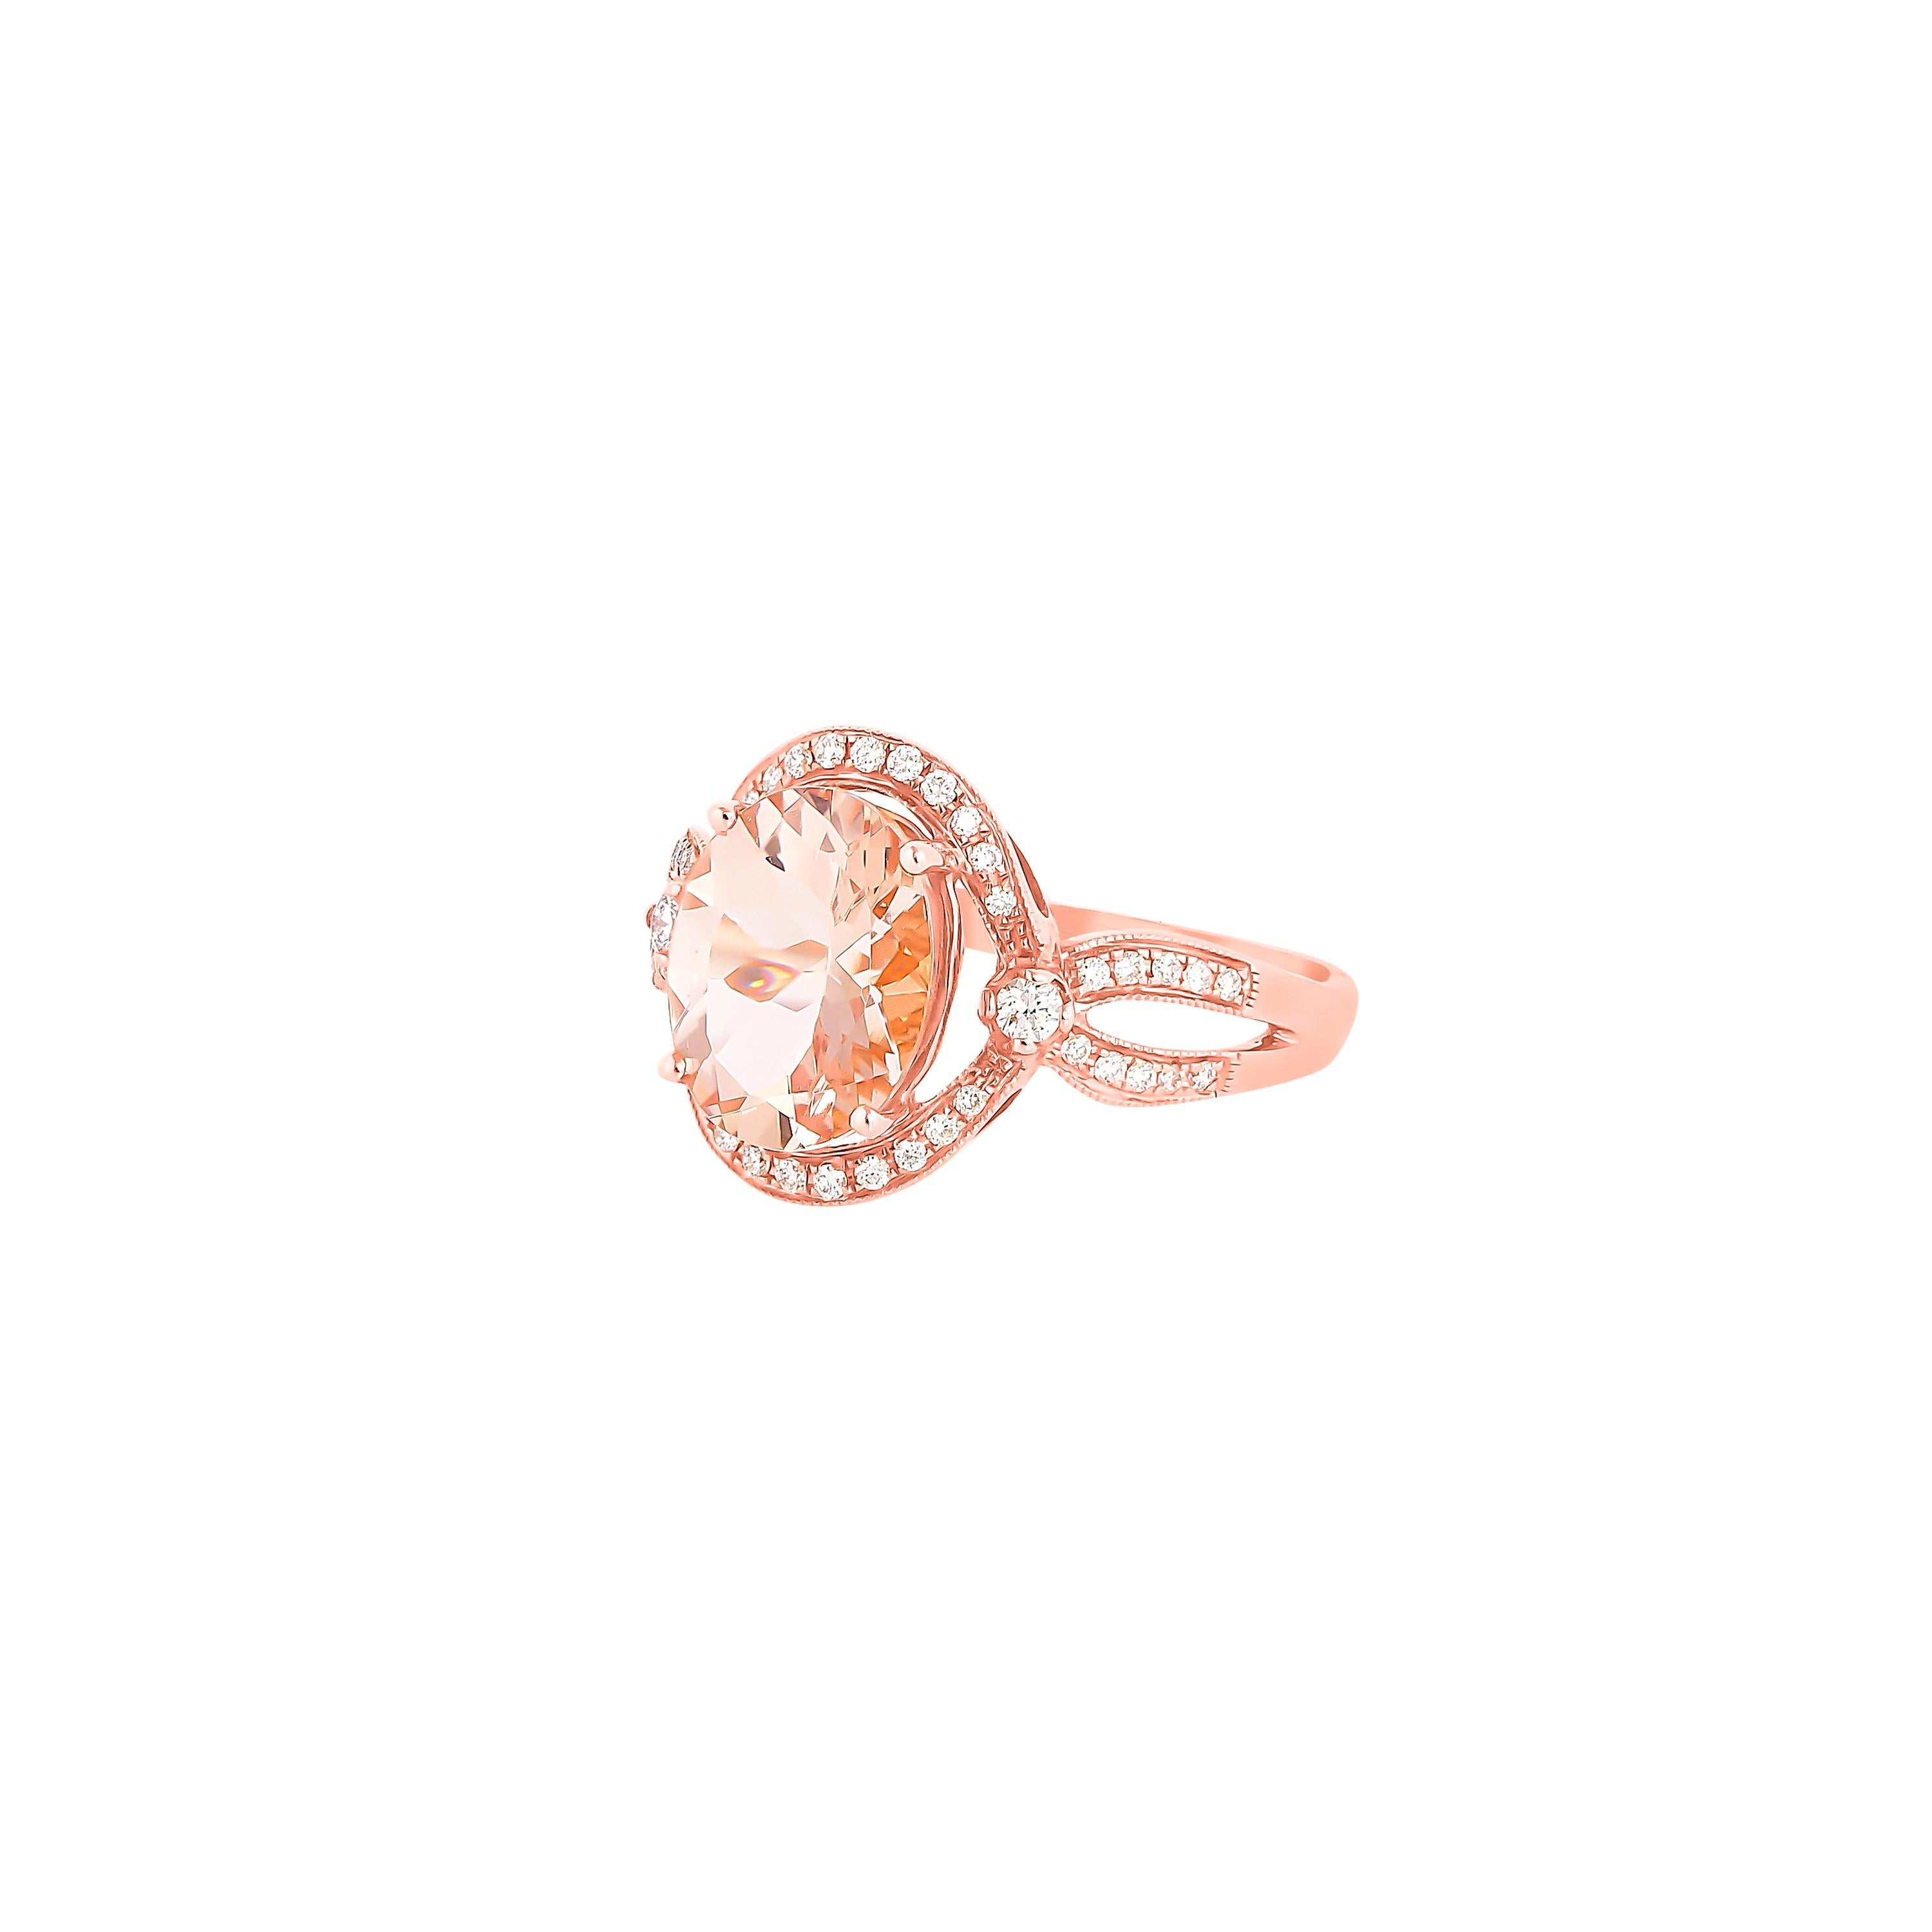 Oval Cut 2.09 Carat Morganite and Diamond Ring in 18 Karat Rose Gold For Sale